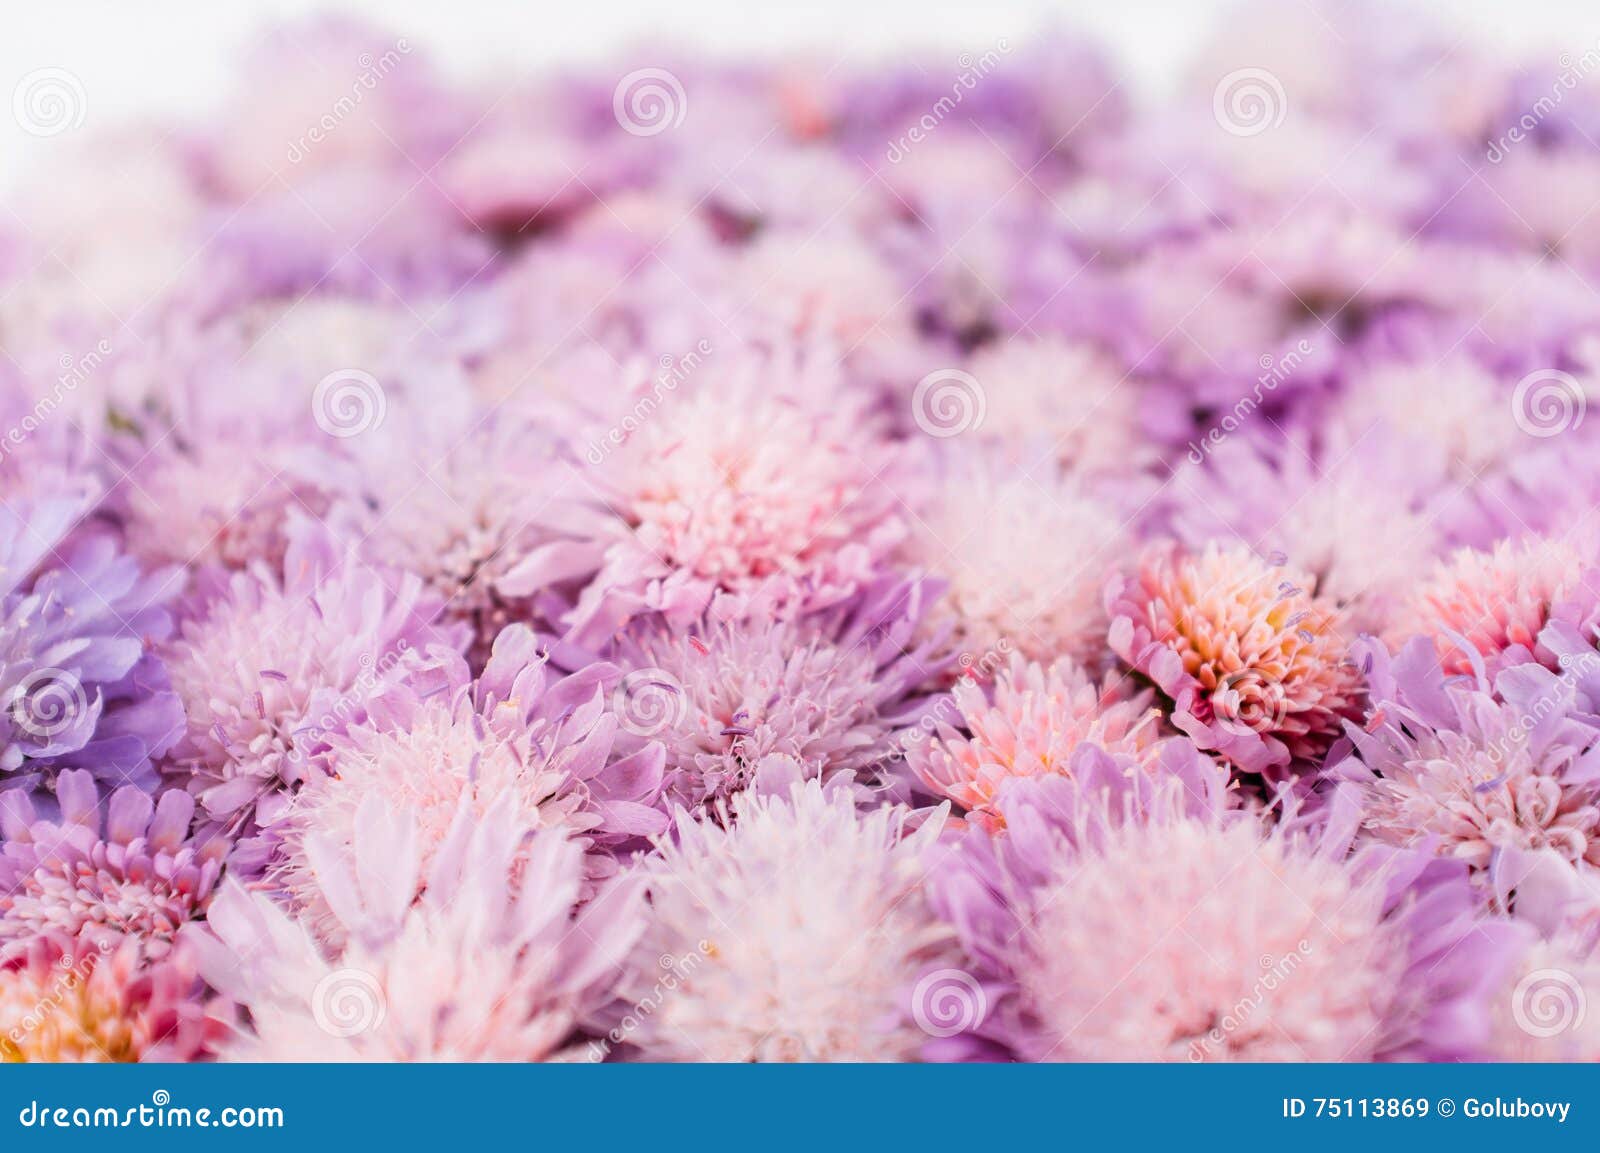 delicate aster background, romantic flower placer